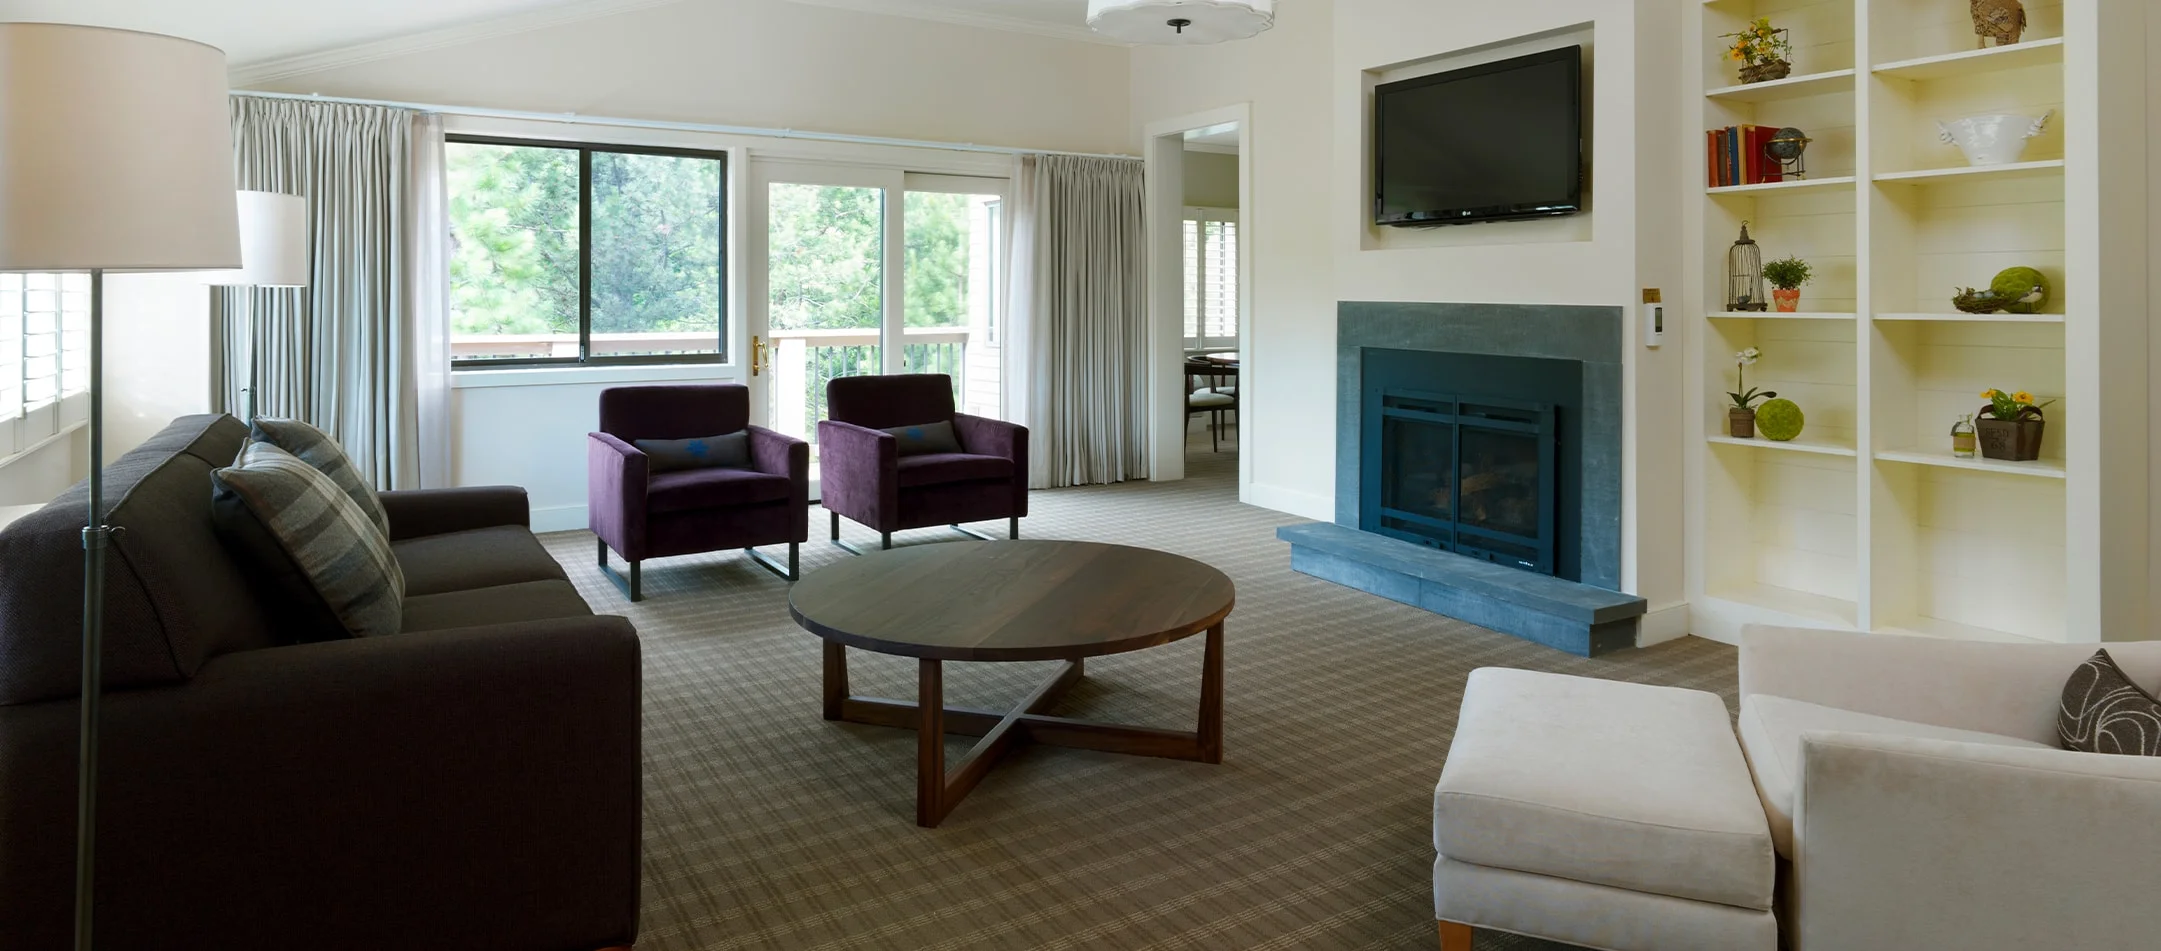 hotel suites at Topnotch Resort Stowe